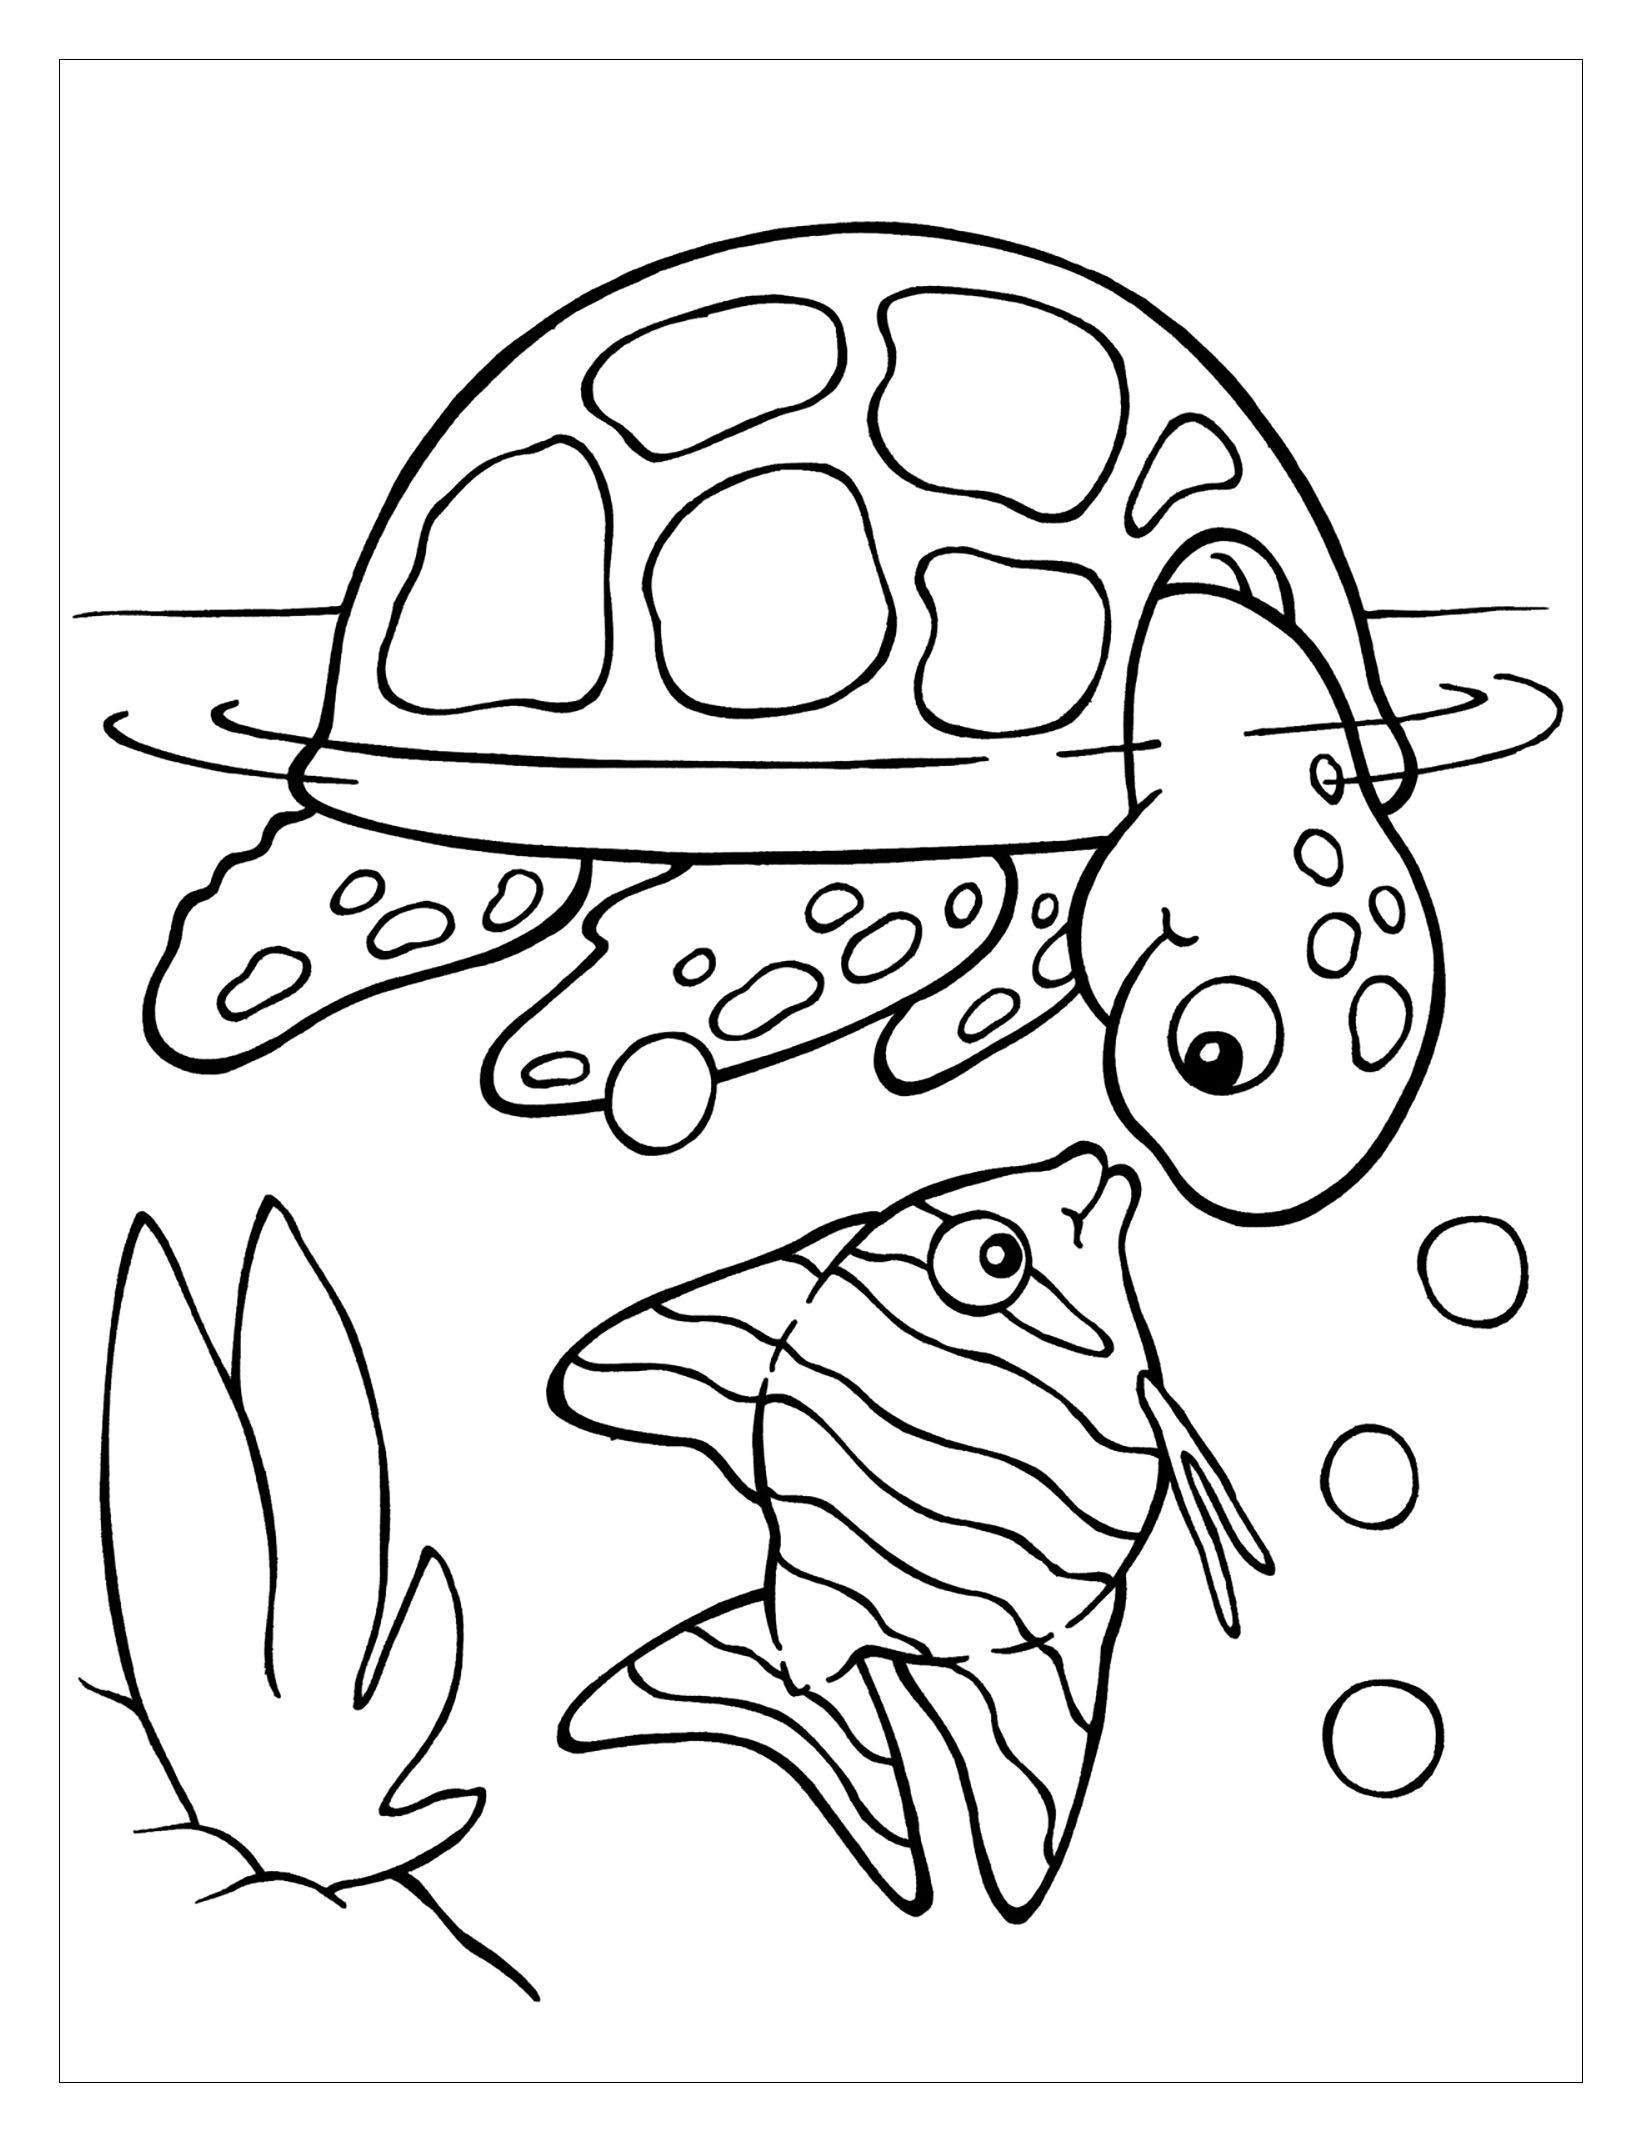 Turtles to color for kids   Turtles Kids Coloring Pages